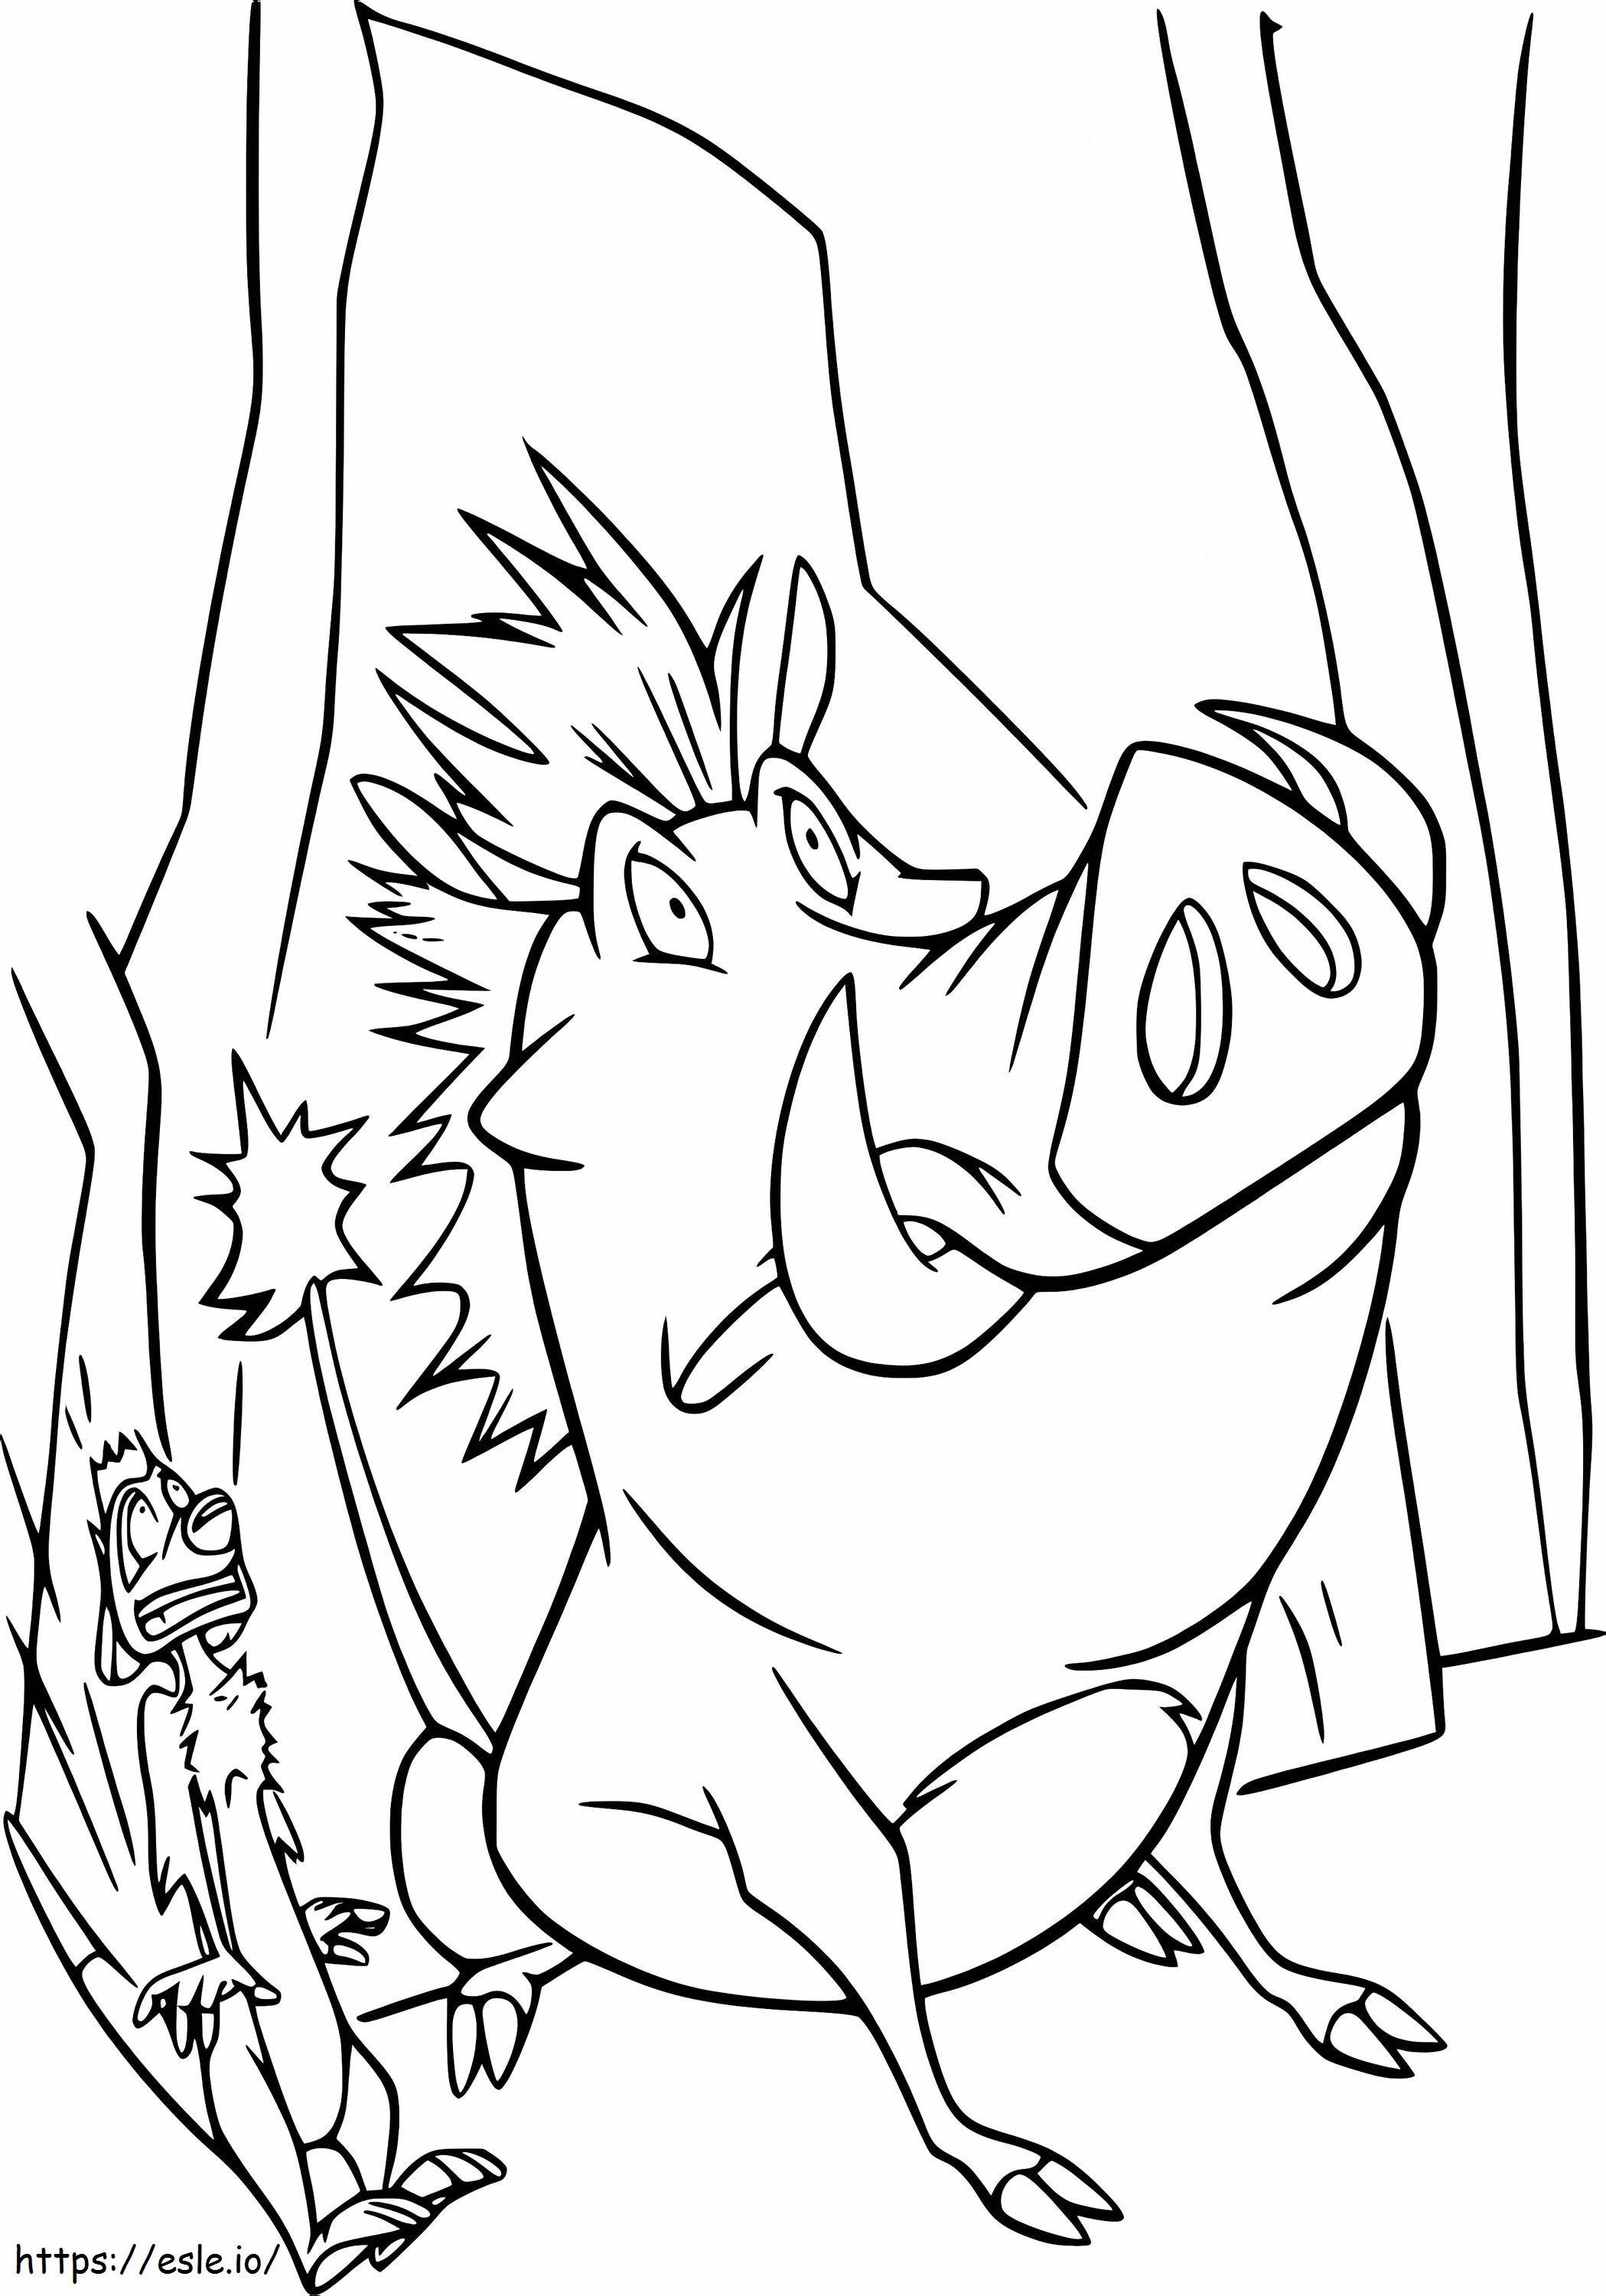 Scared Timon And Pumbaa coloring page